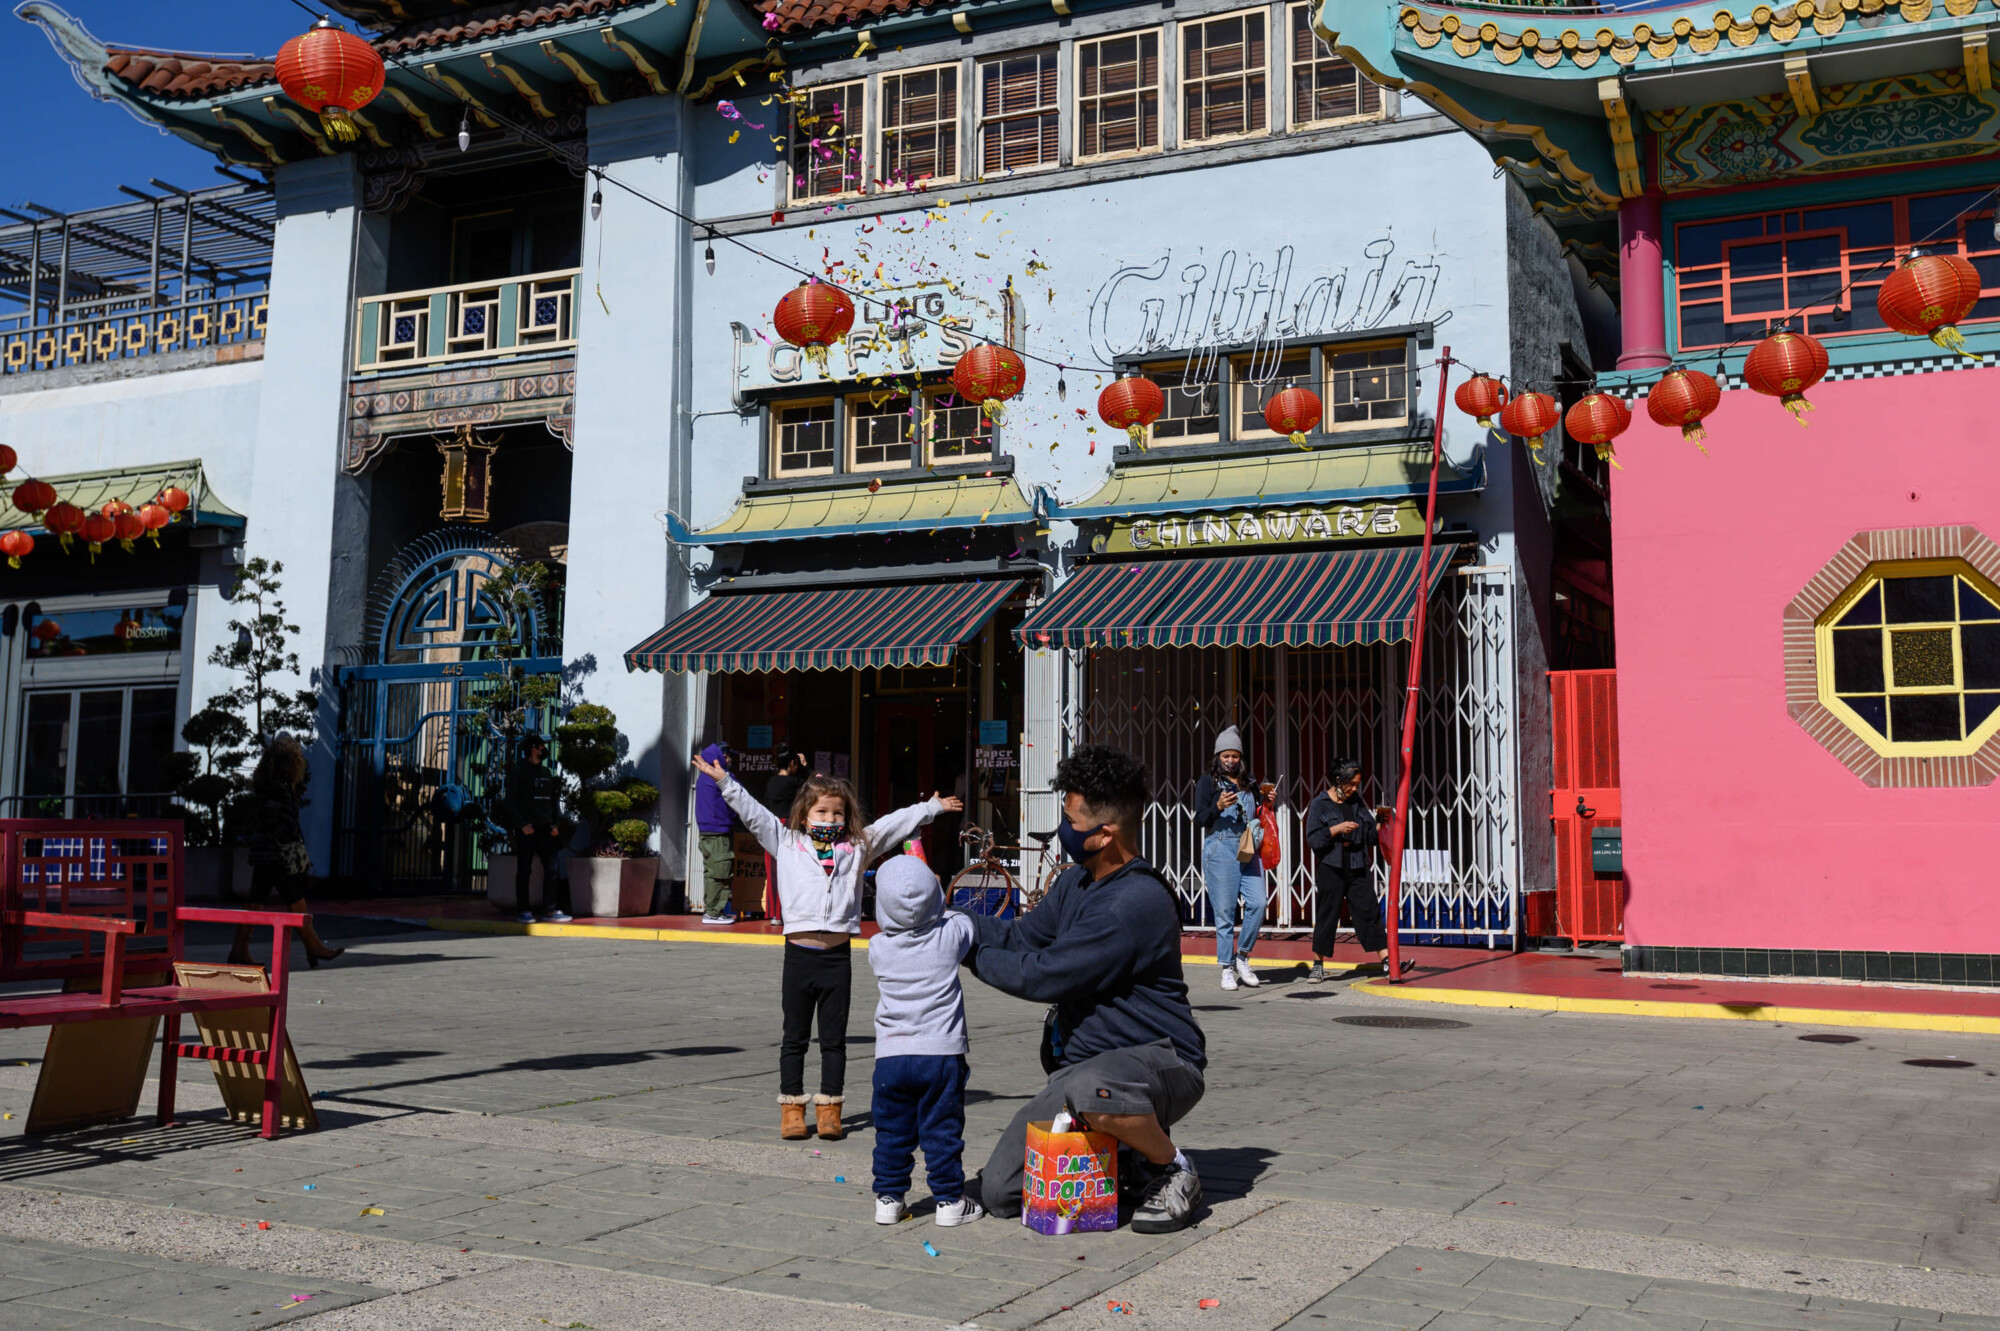 Support Grows for Elderly in California Chinatown